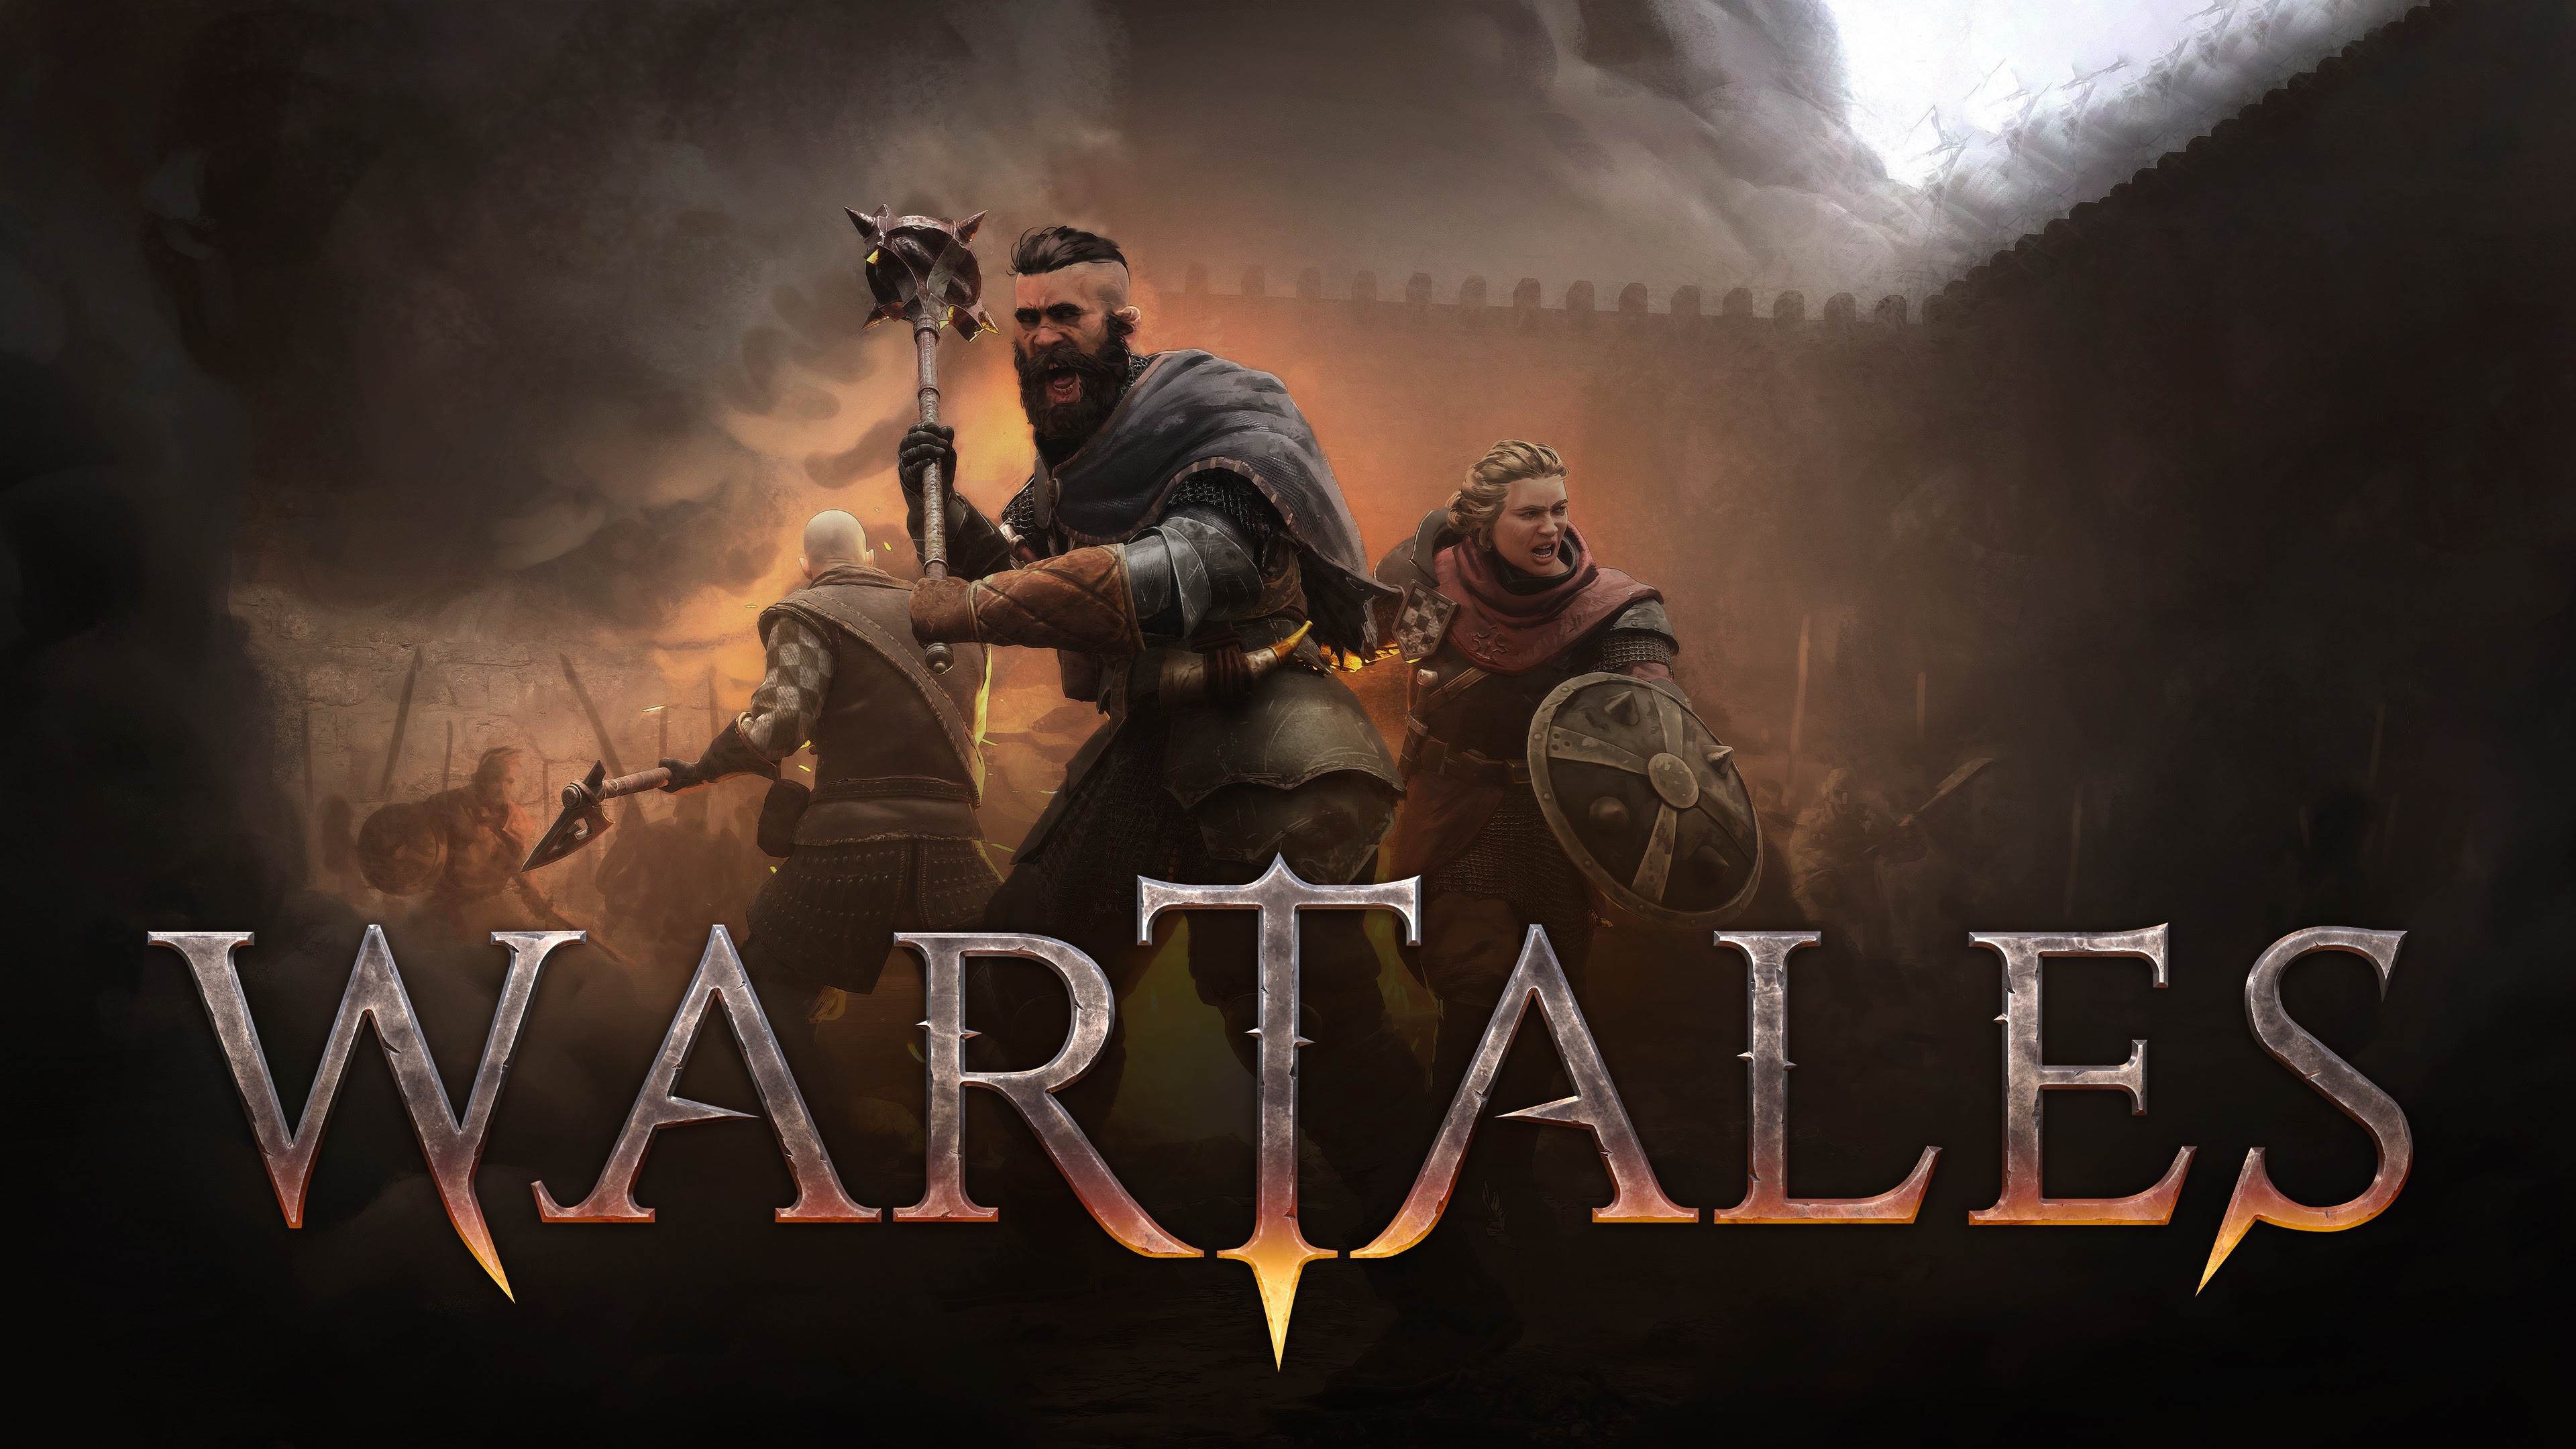 Wartales is out of Early Access and officially launched – open-world tactical RPG with very positive reviews